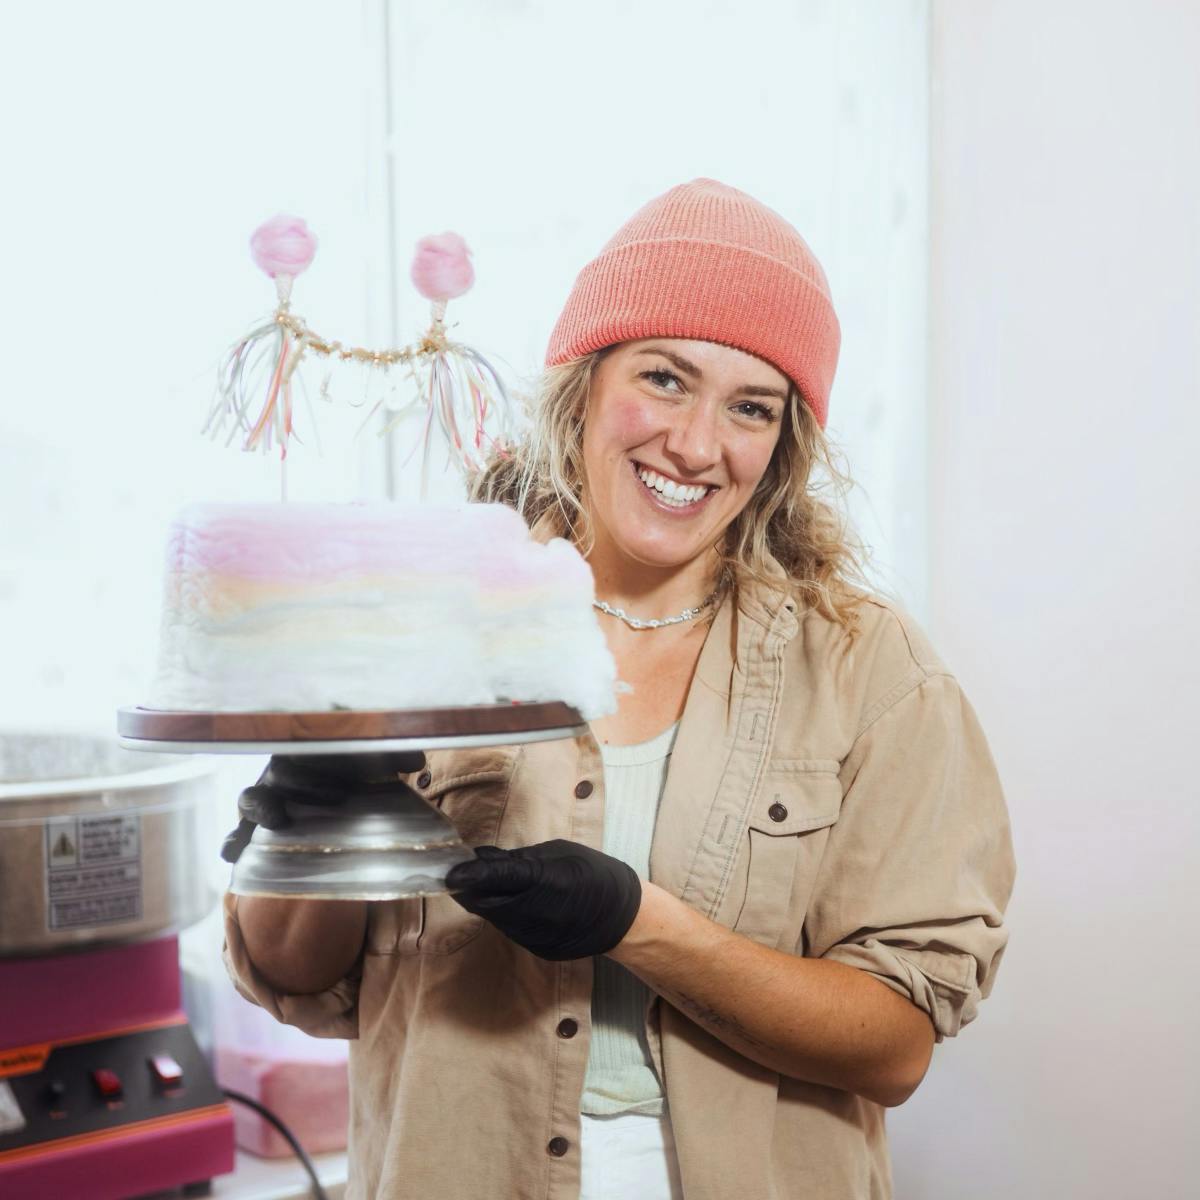 Cake Life Bake Shop: The Philly Bakery That Makes Beyoncé's Birthday Cakes  | Fortune